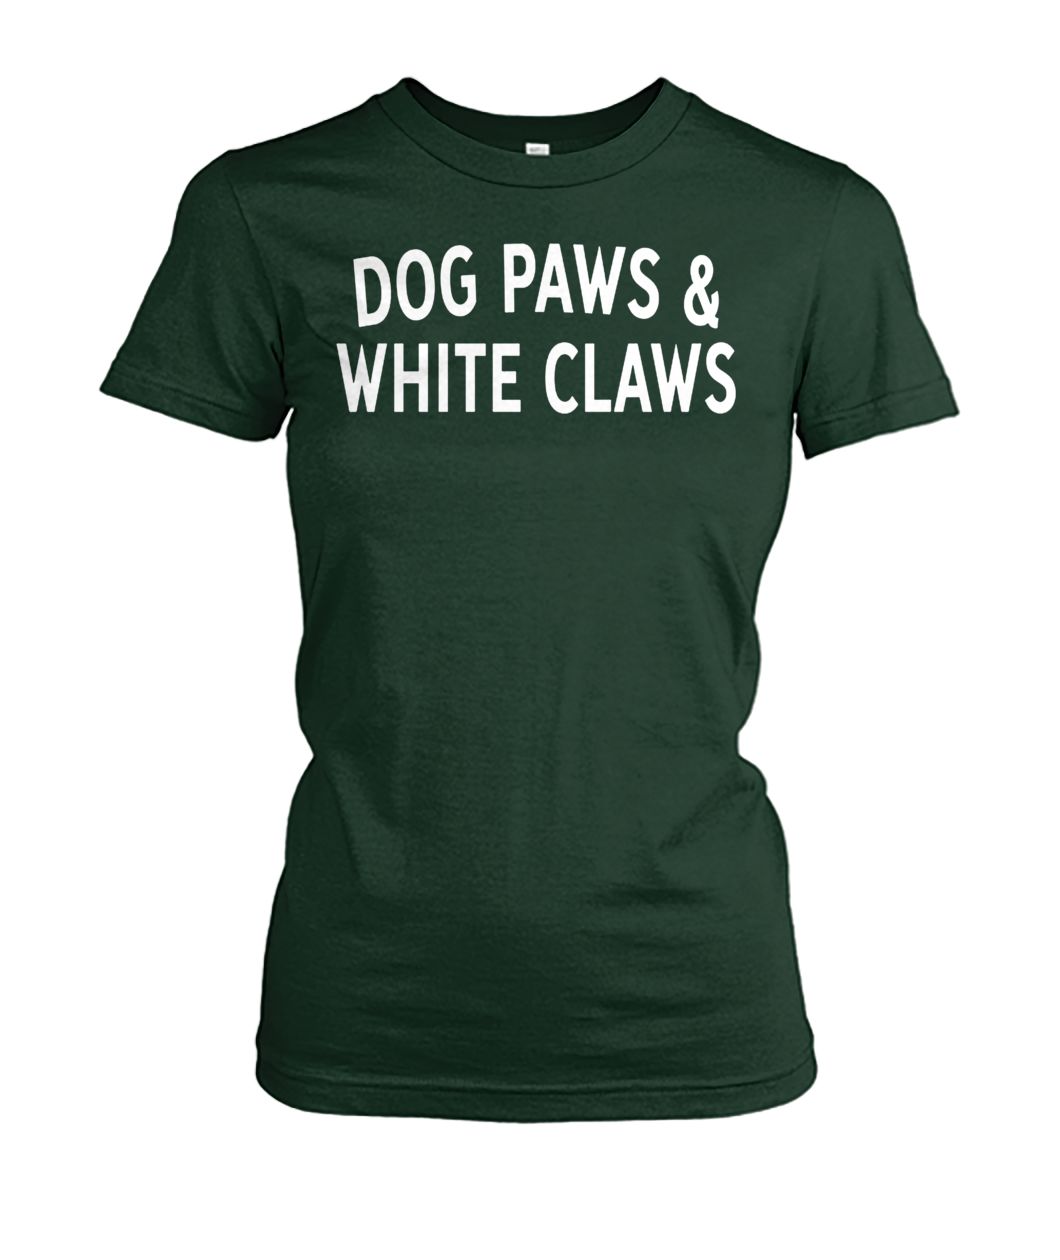 Dog paws and white claws women's crew tee